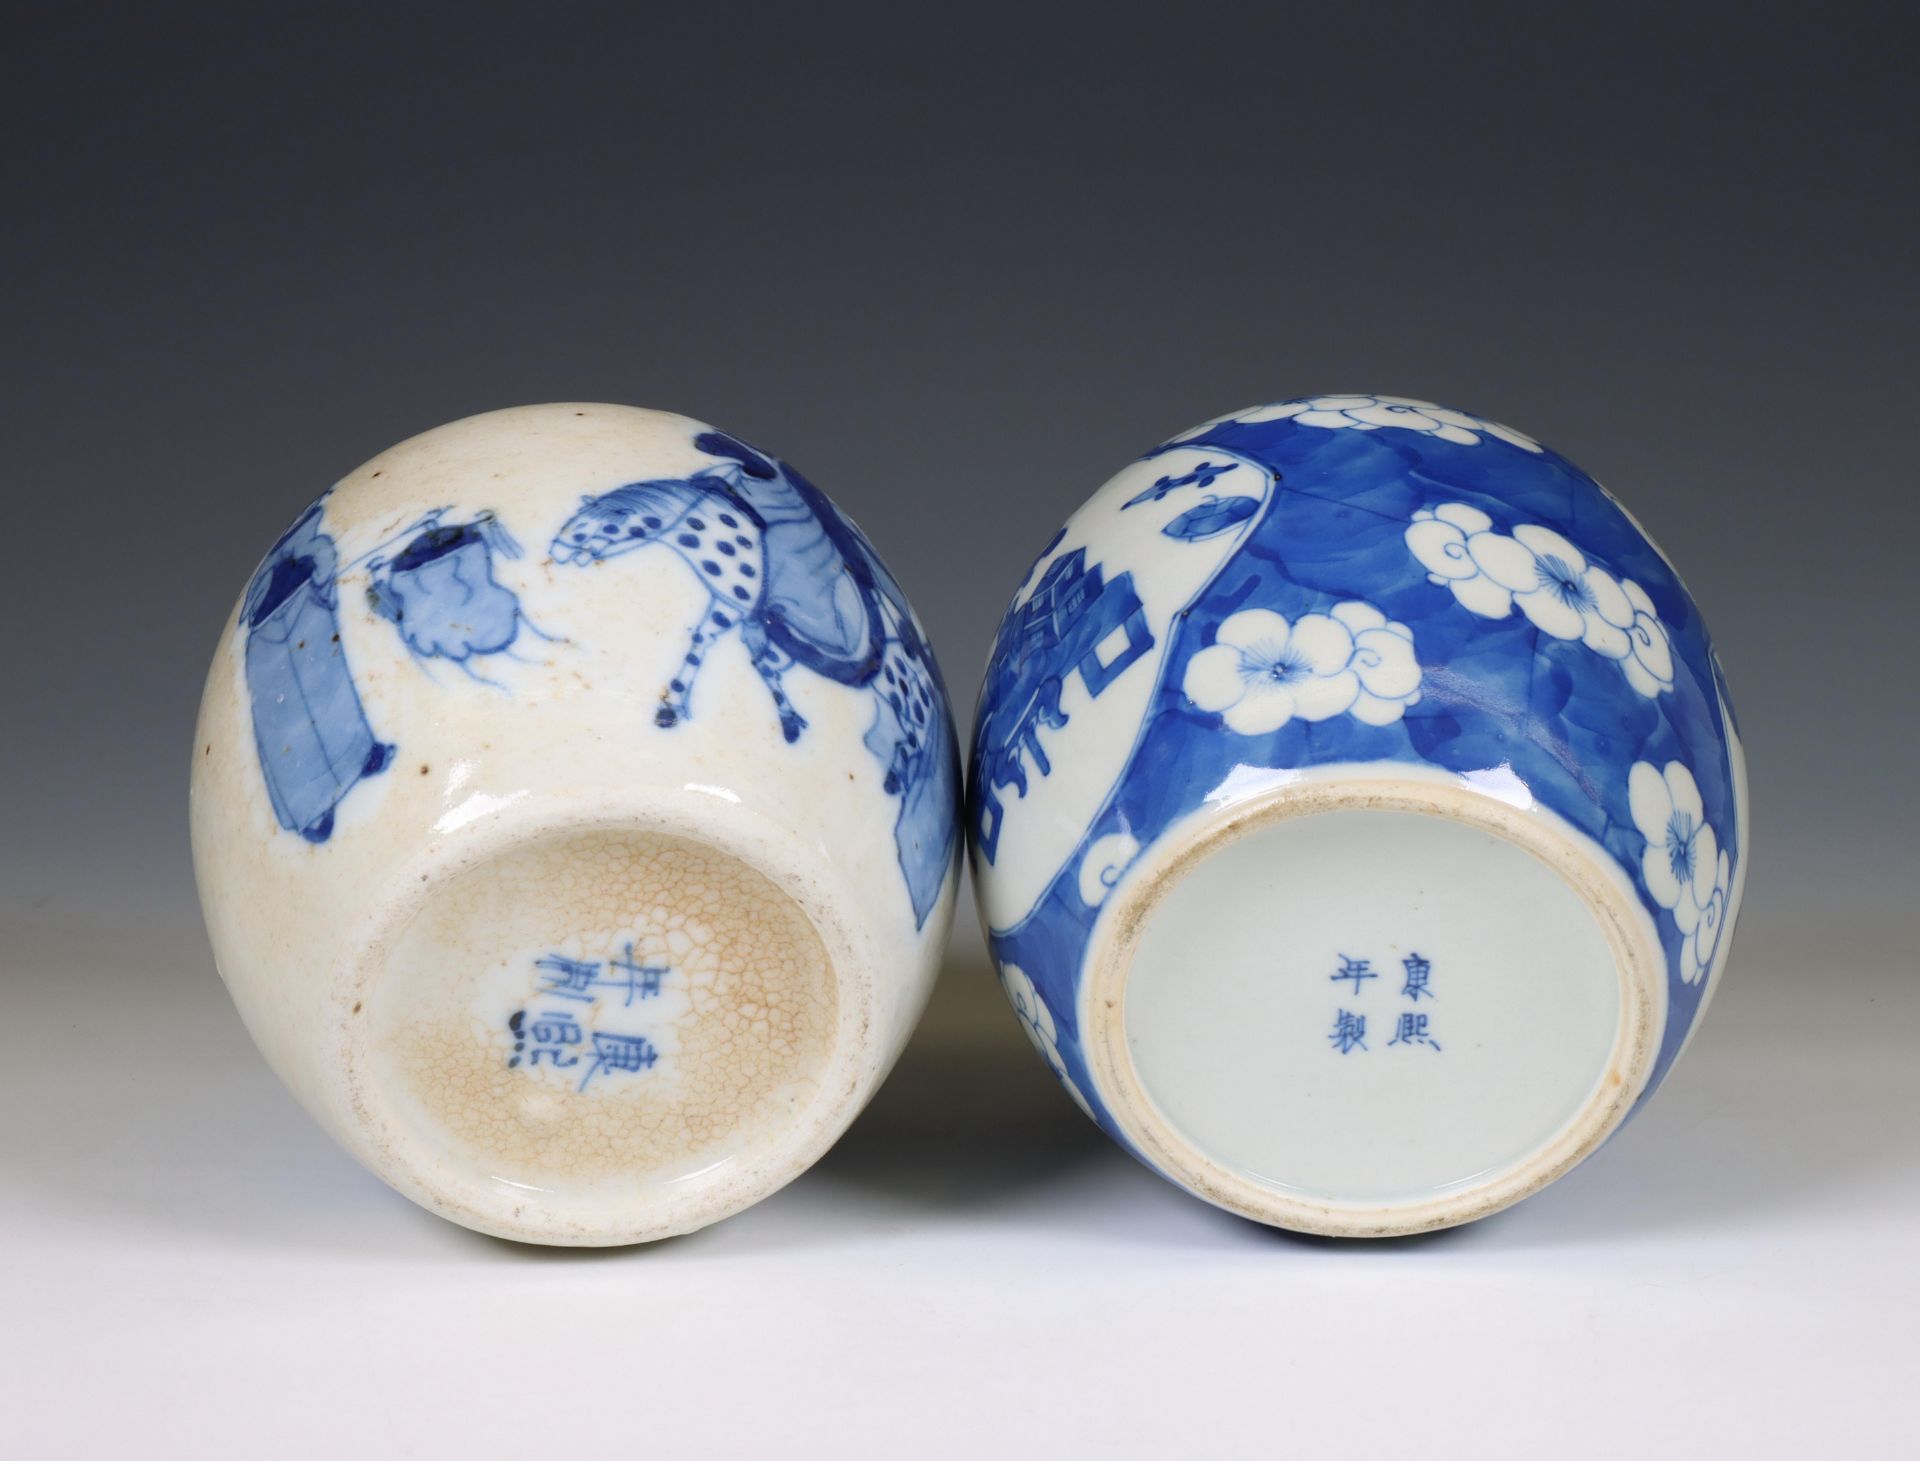 China, two blue and white porcelain ginger jars and covers, 19th-20th century, - Image 2 of 3